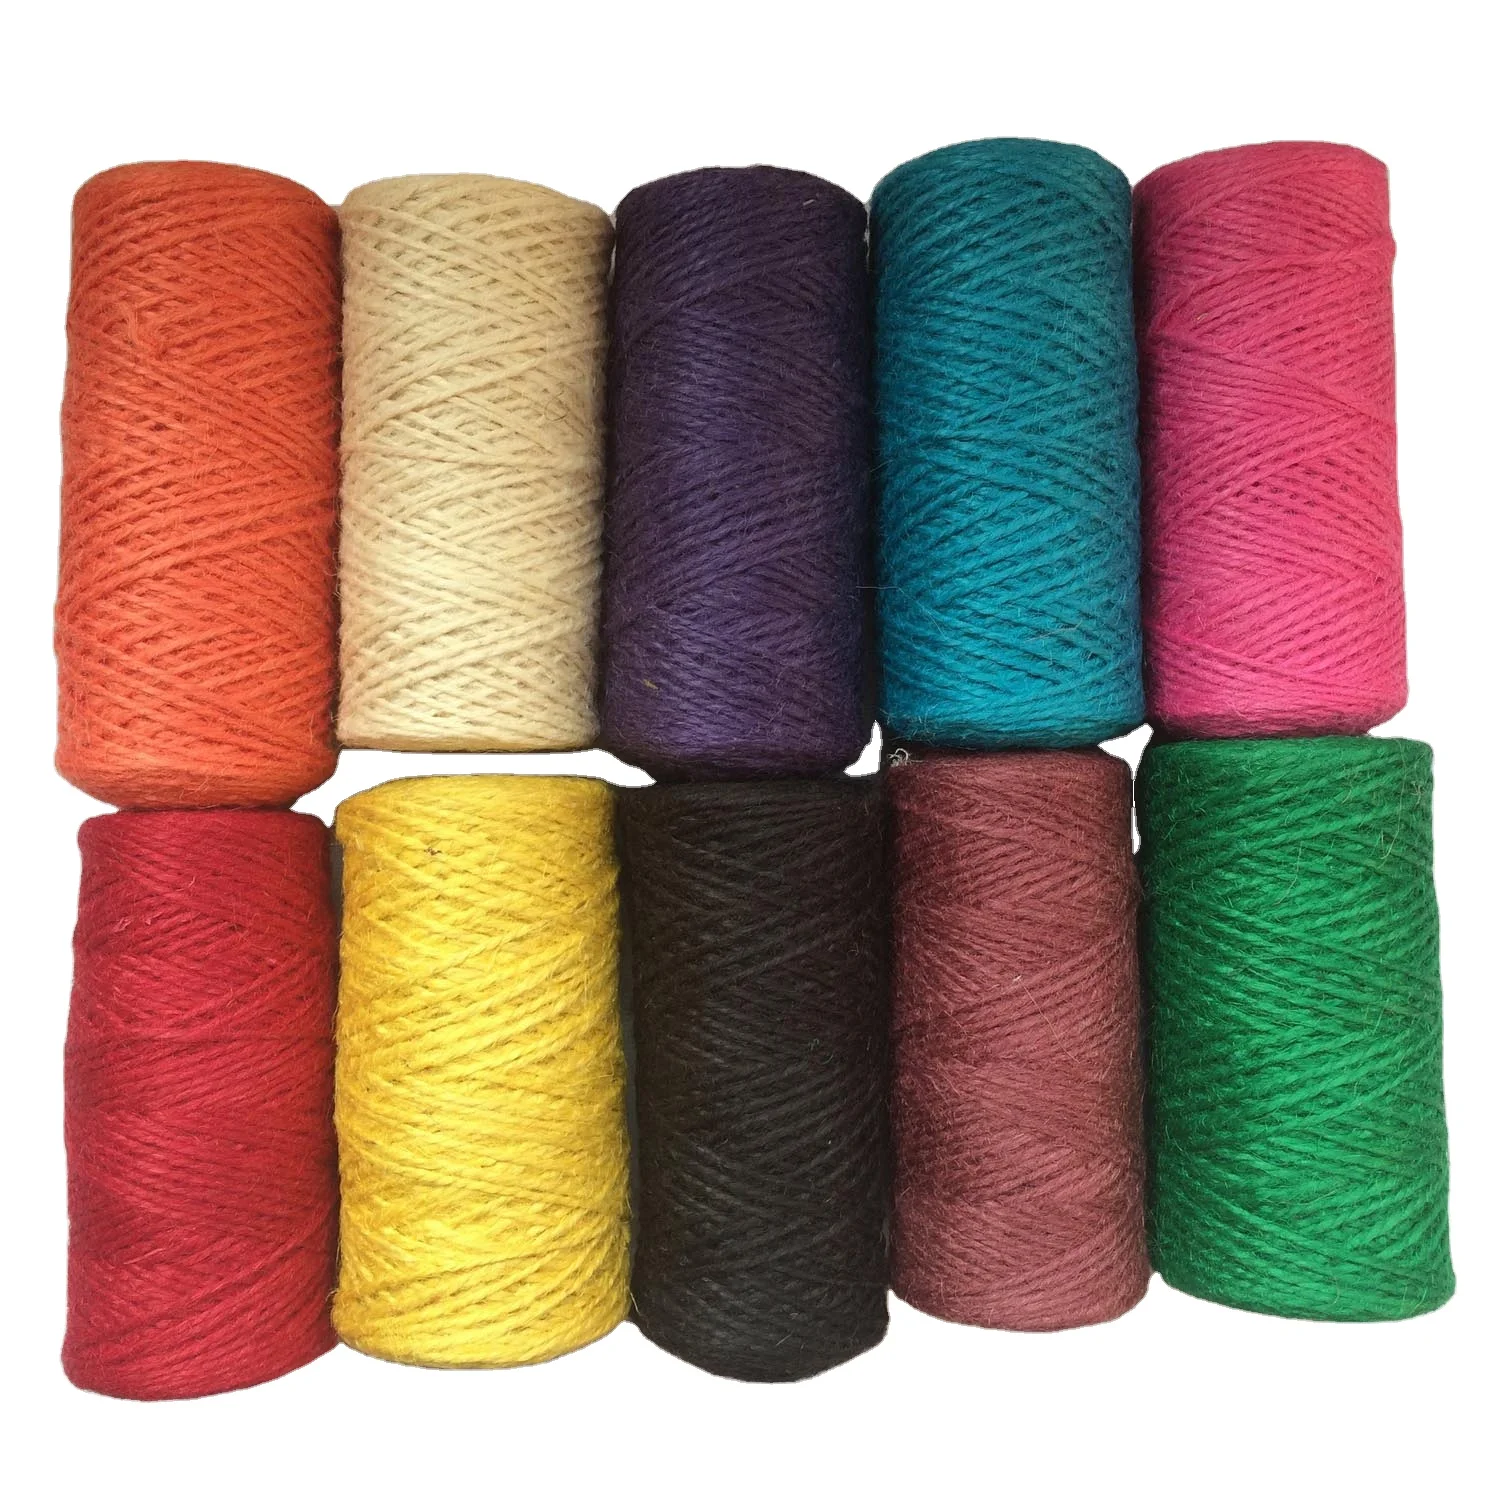 1.5mm 2 Ply 100m Spool Colored Jute Twine,Colored Jute Rope,Jute String -  Buy Colored Jute Rope,Jute Twine,Jute String Product on